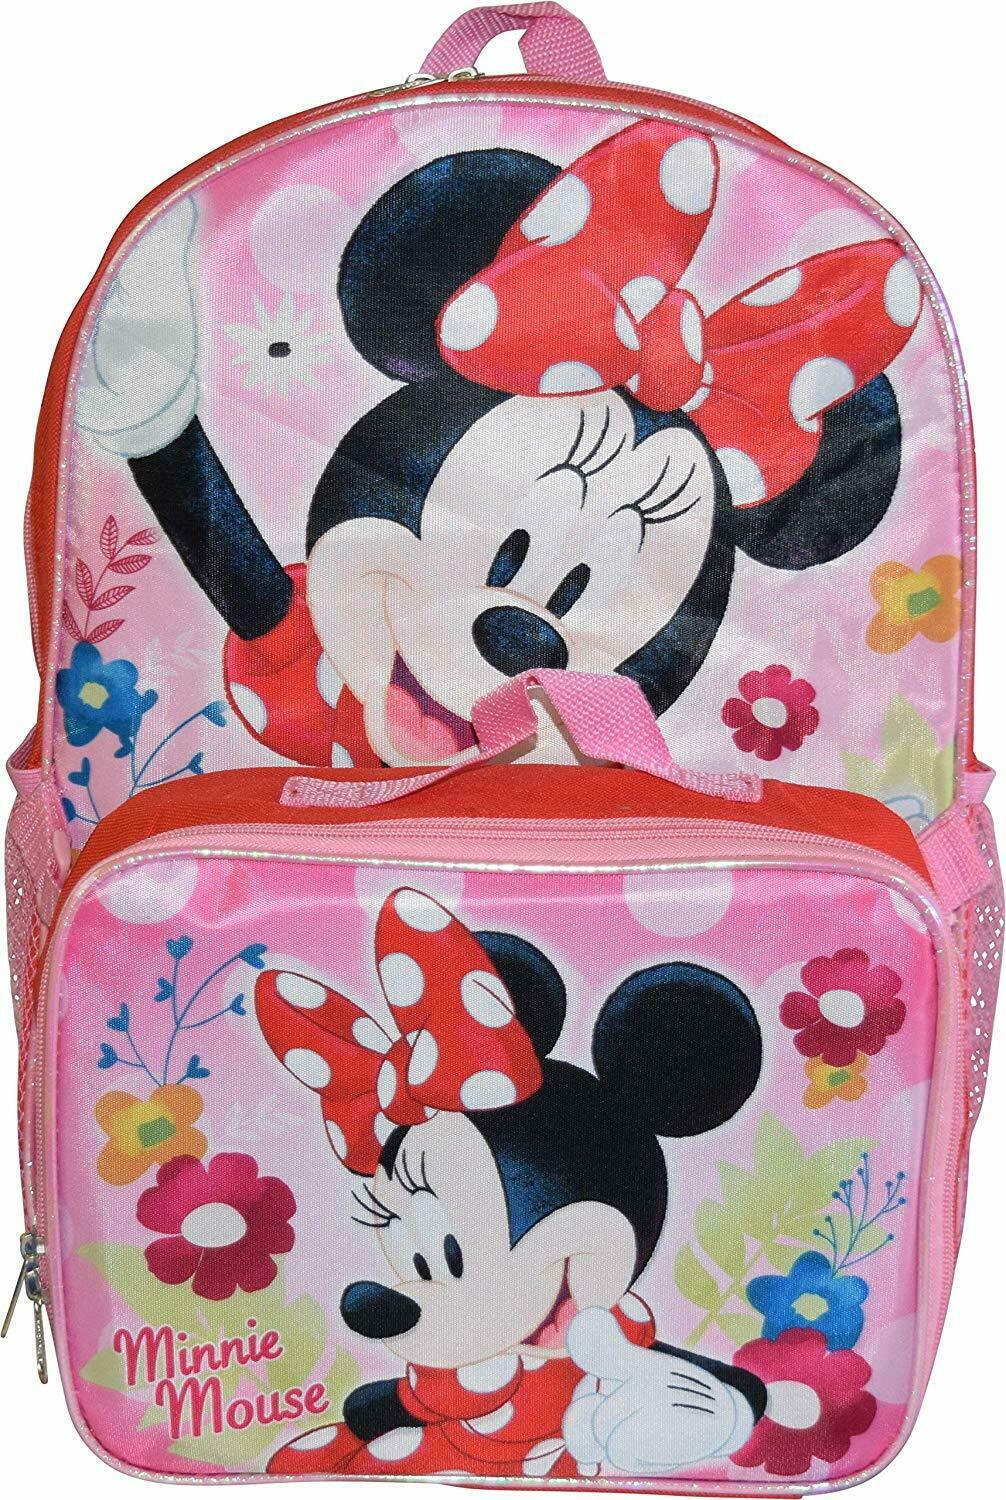 Minnie Mouse Girl's 16" Backpack With Detachable Lunch Box - 2 Piece Set